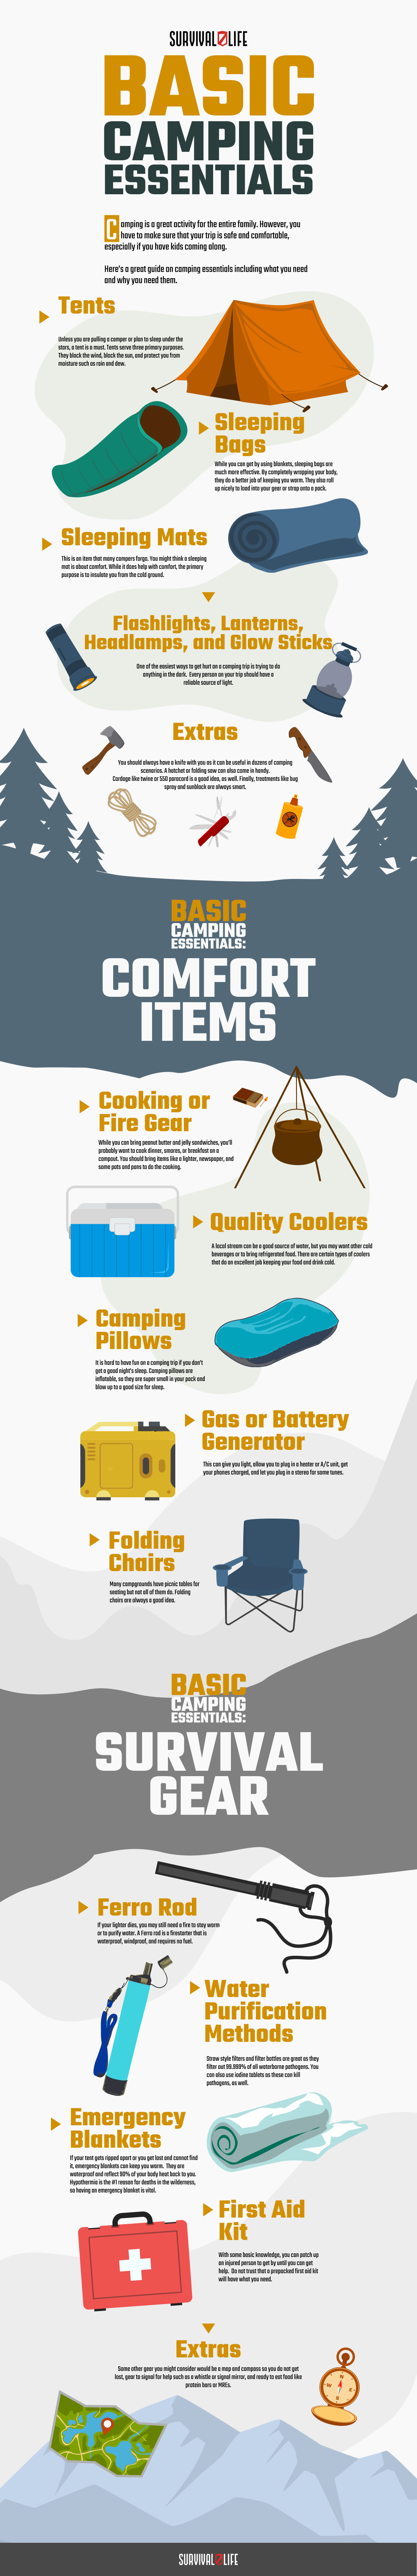 Check out Camping Essentials For A Fun And Safe Camping Trip at https://survivallife.com/camping-essentials/